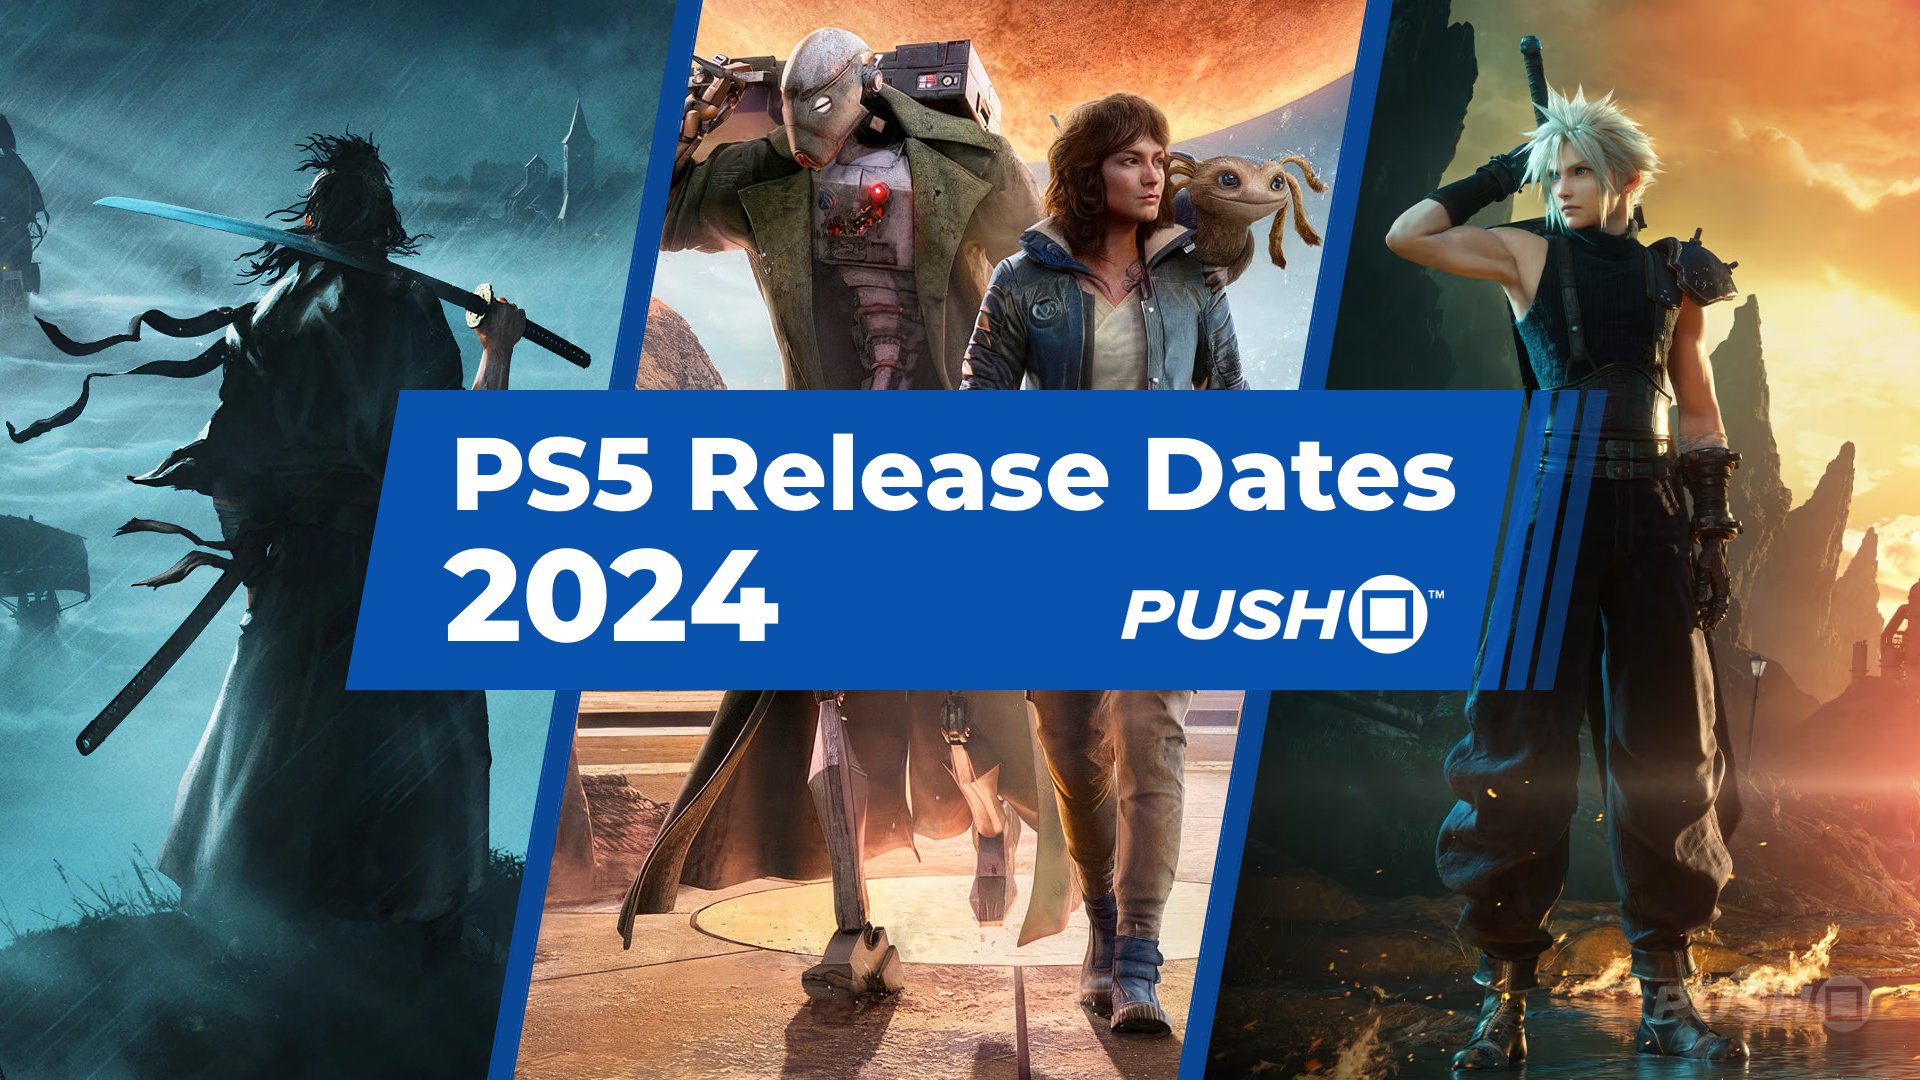 ps4 new releases january 2020